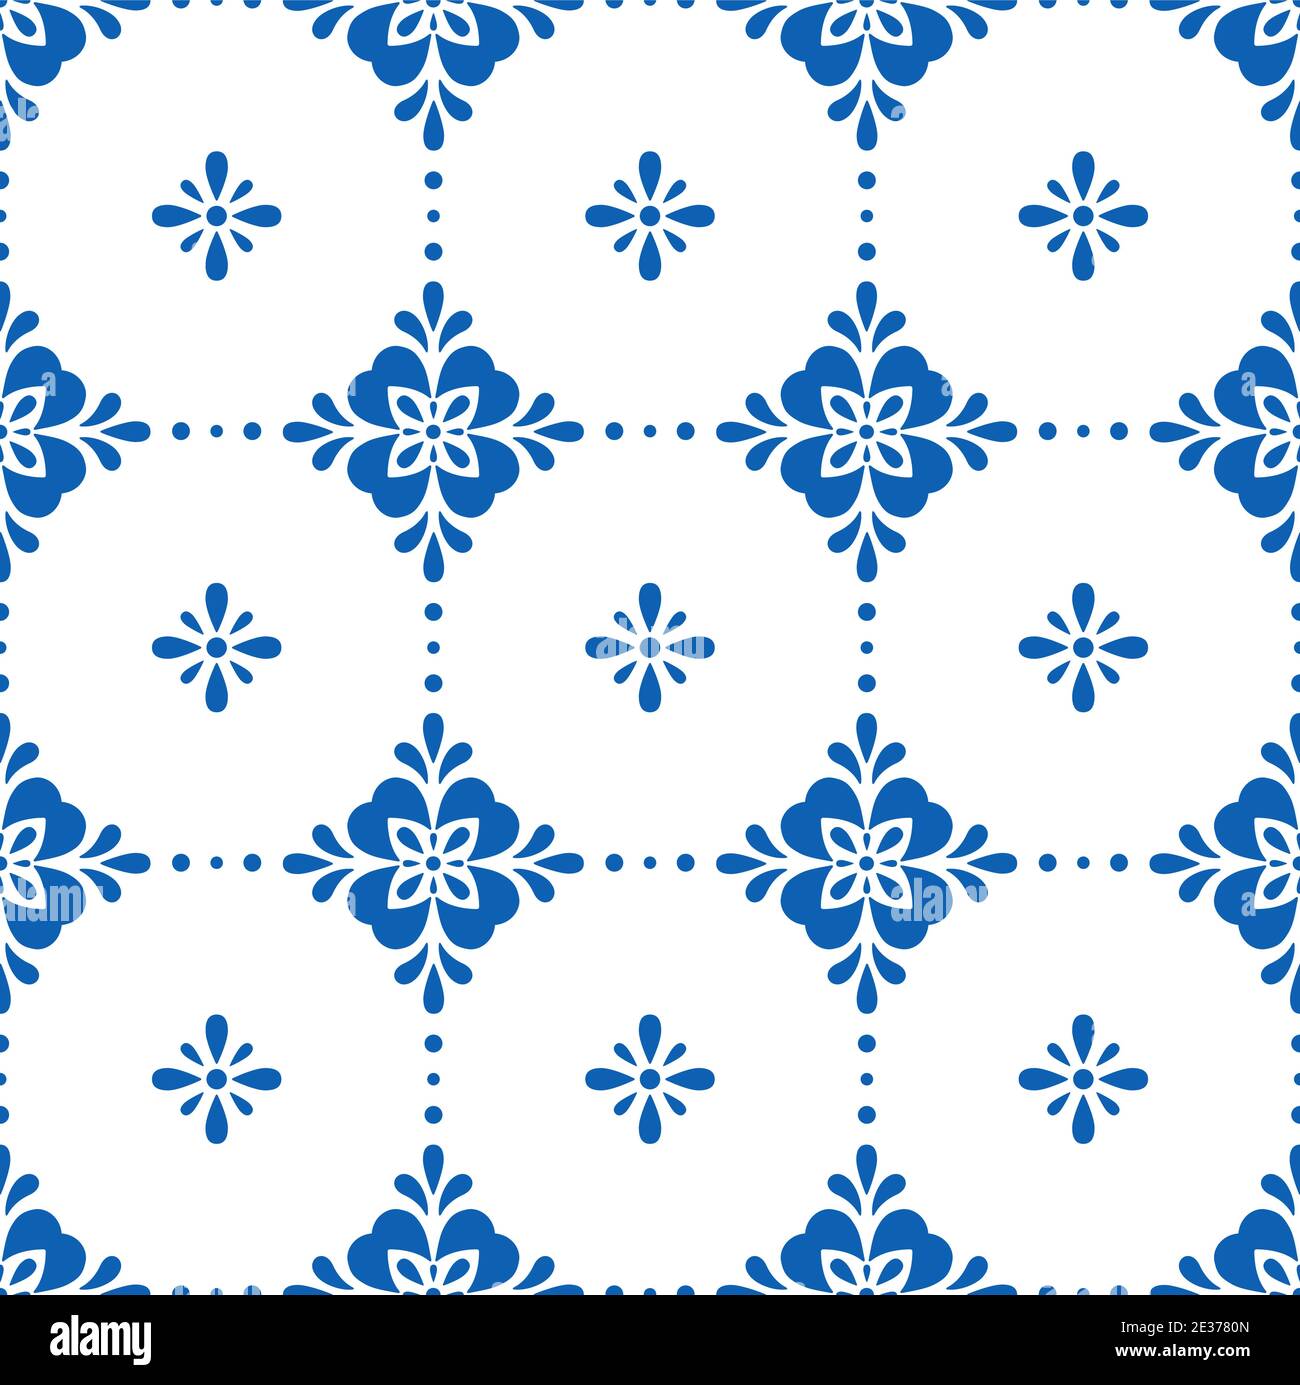 White and blue ceramic tile seamless pattern. Simple geometric floral ornament. Vector illustration. Stock Vector